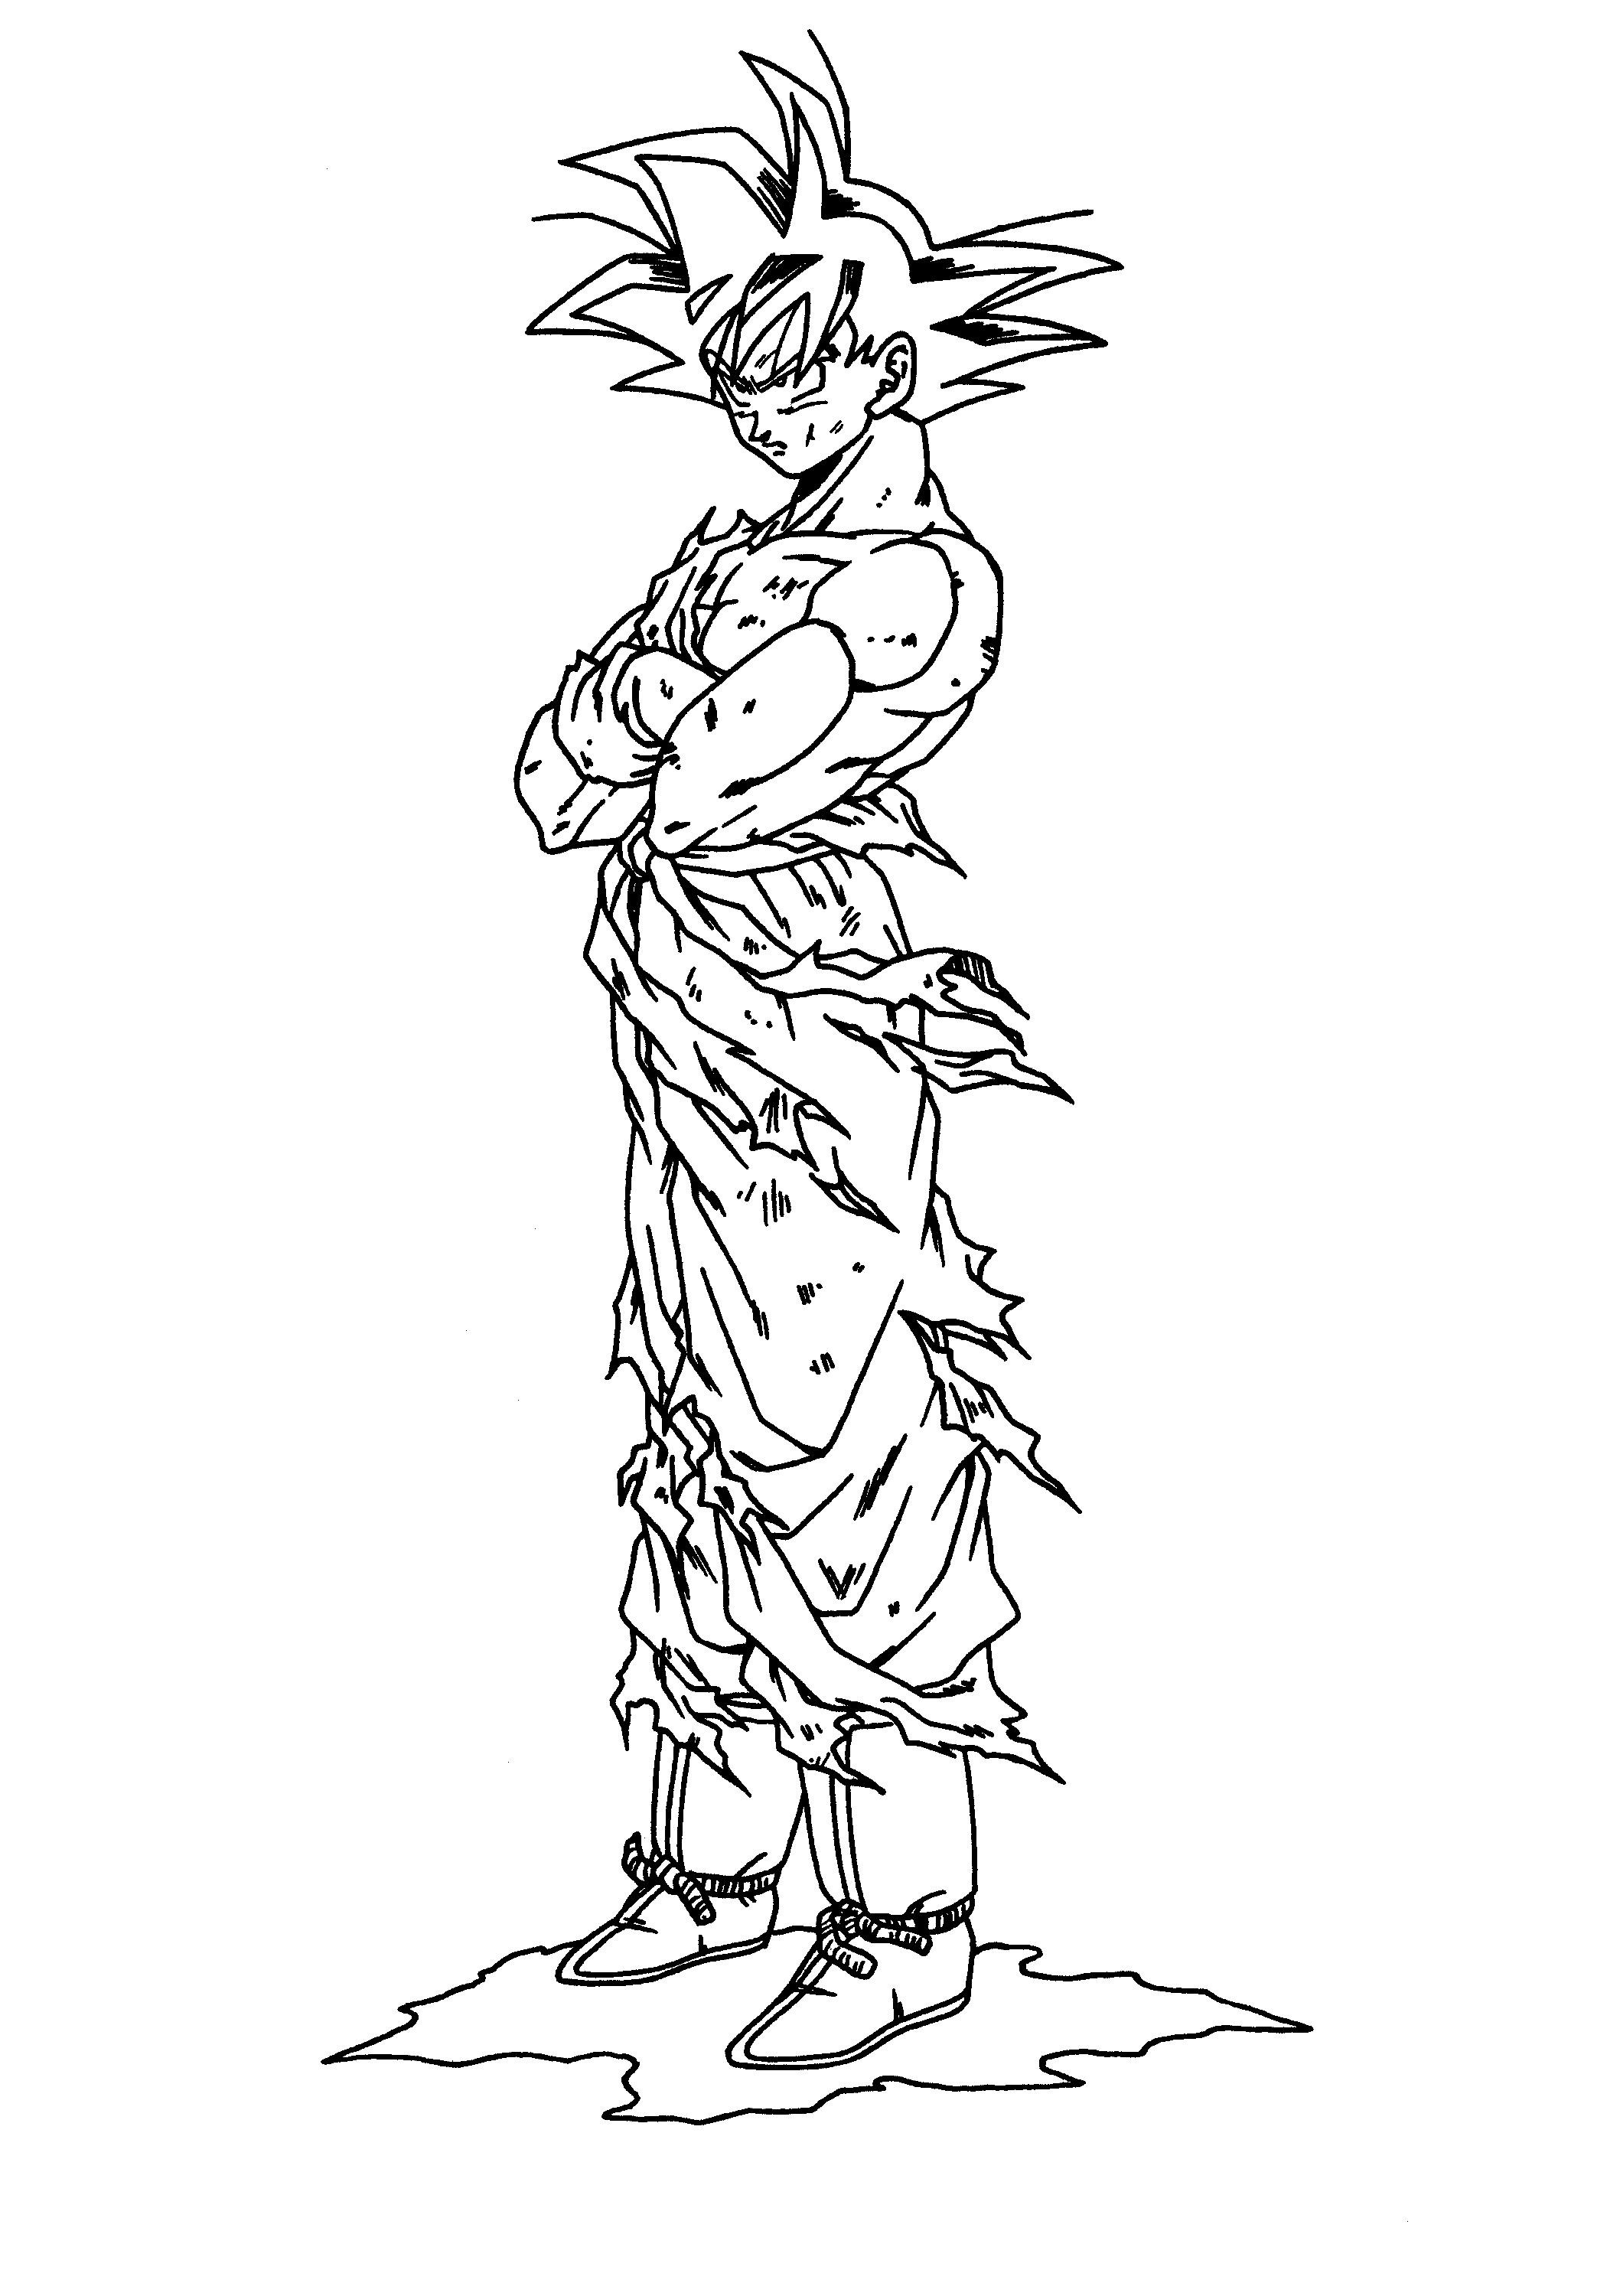 dragon ball z coloring pages goku